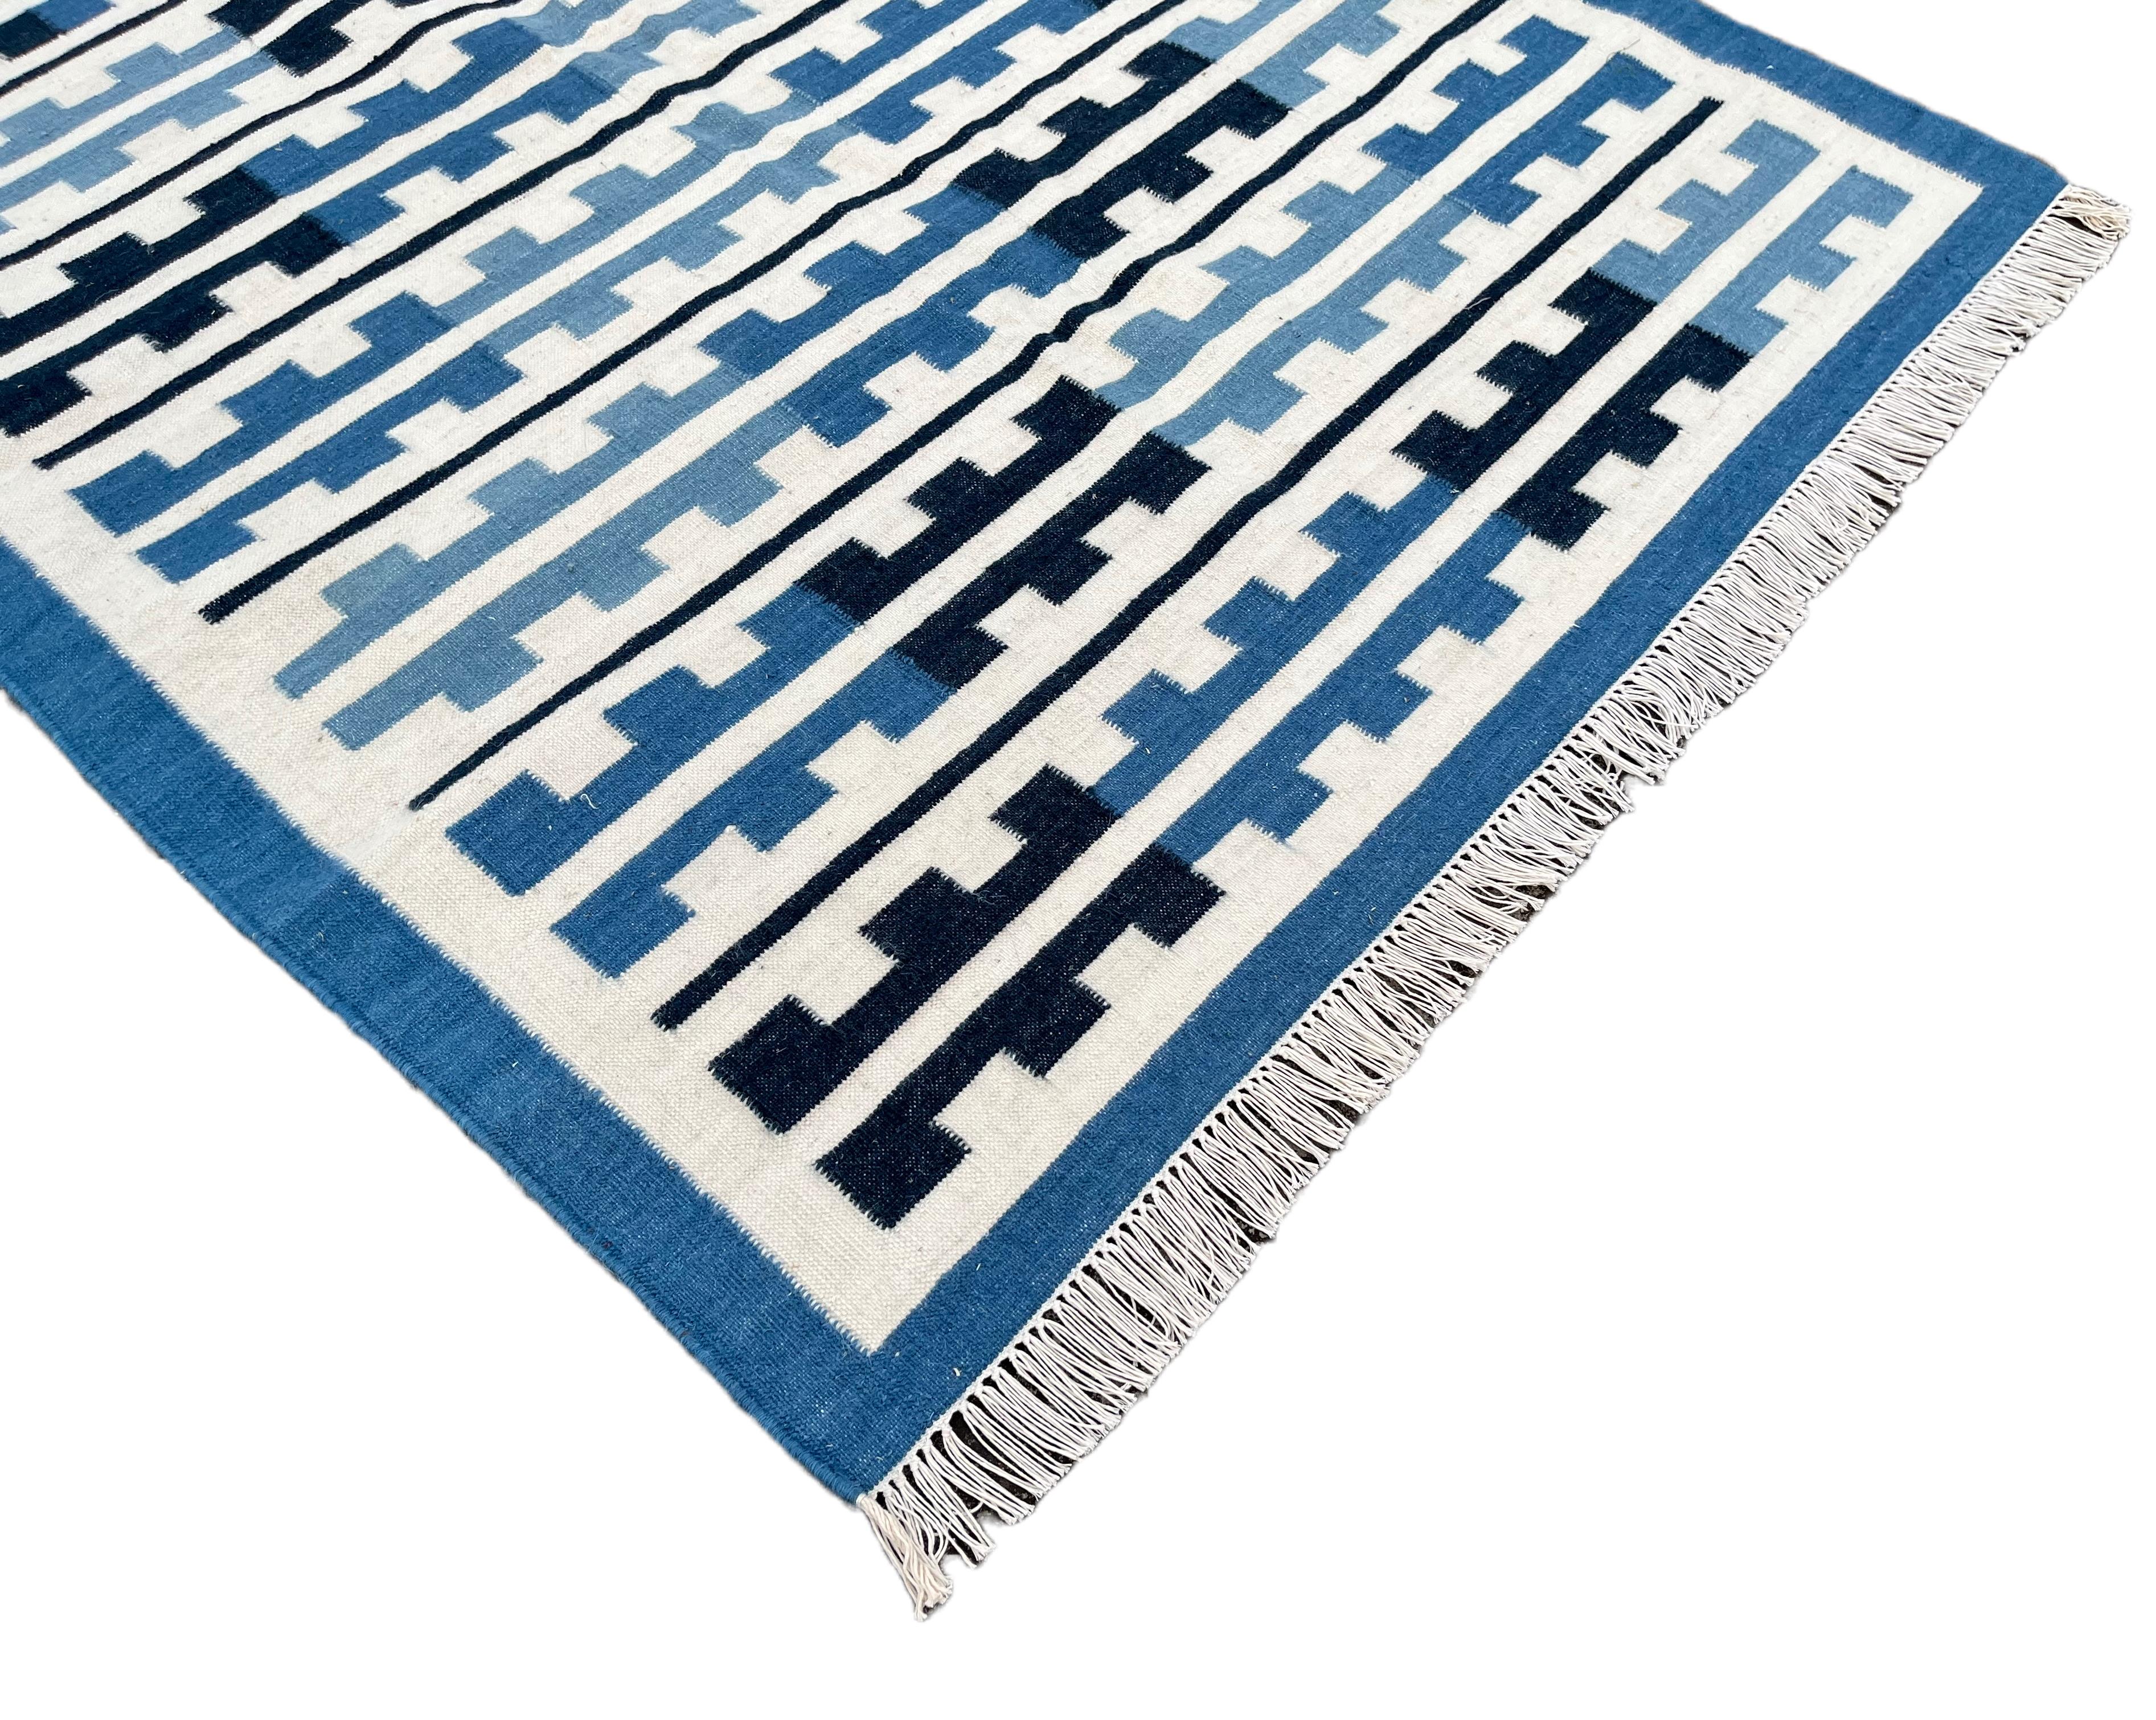 Hand-Woven Handmade Woolen Area Flat Weave Runner, Blue & White Striped Indian Dhurrie Rug For Sale